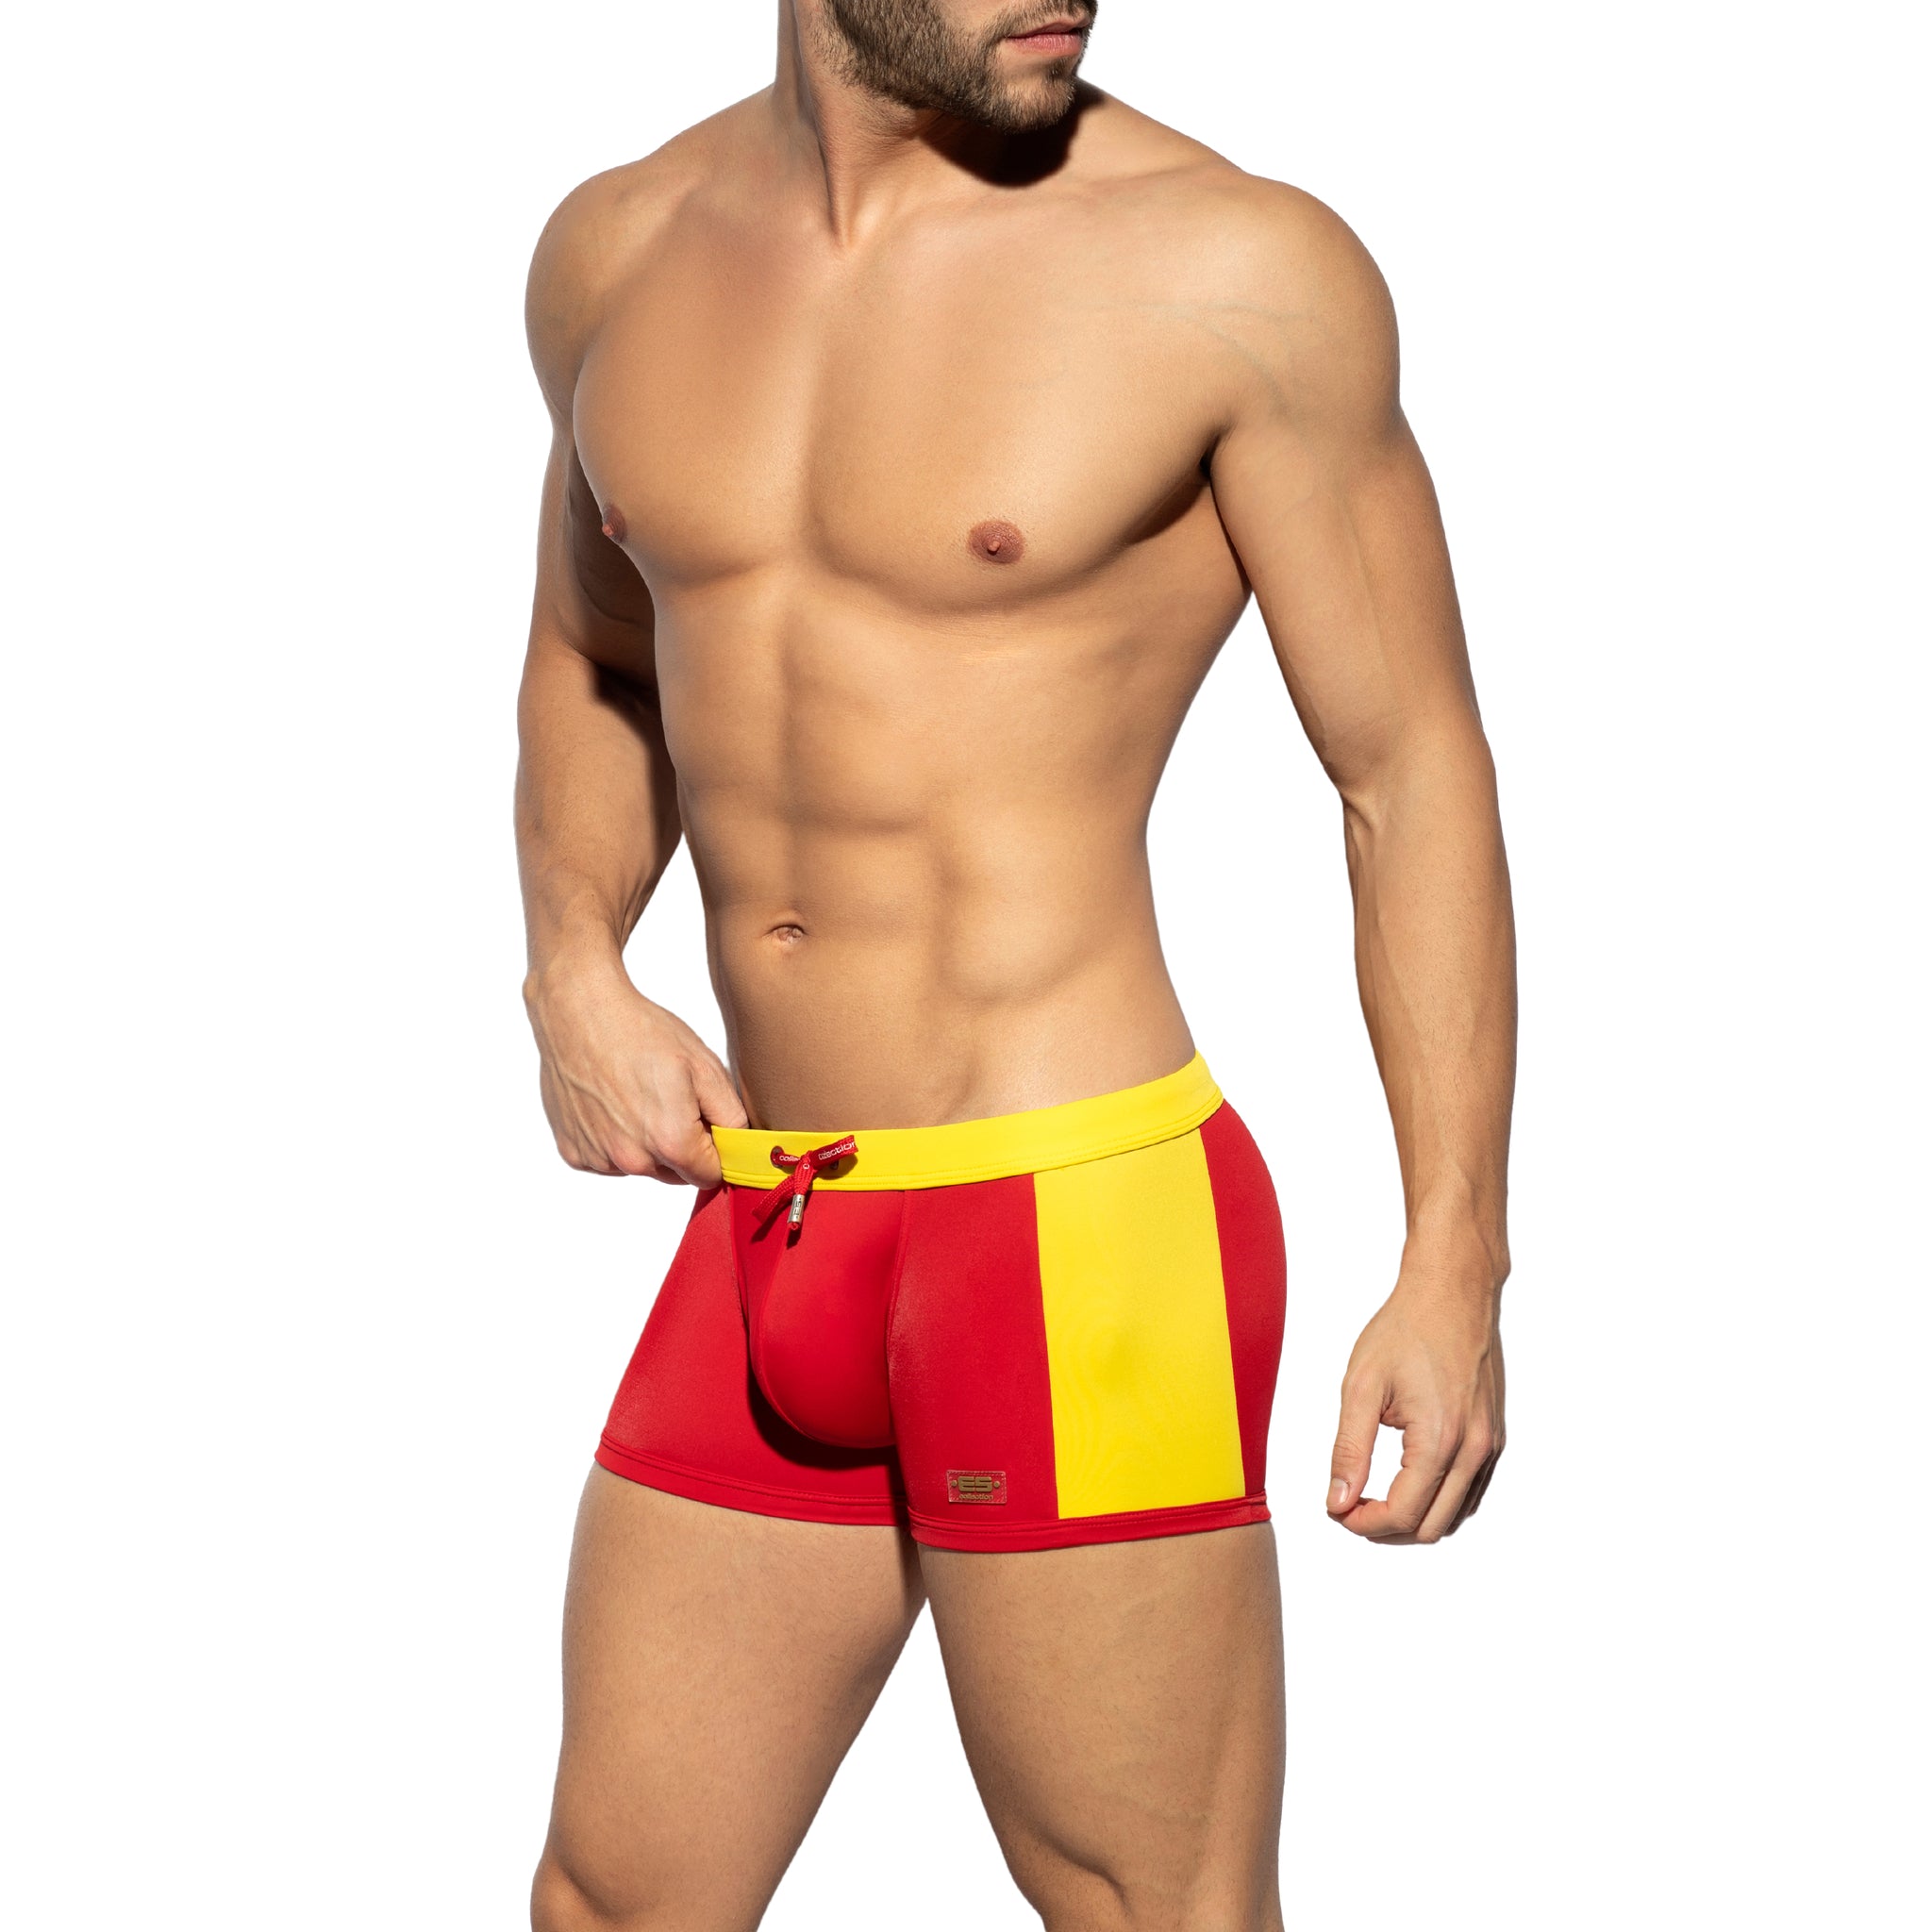 ES Collection Flags Swim Trunk Yellow 2209